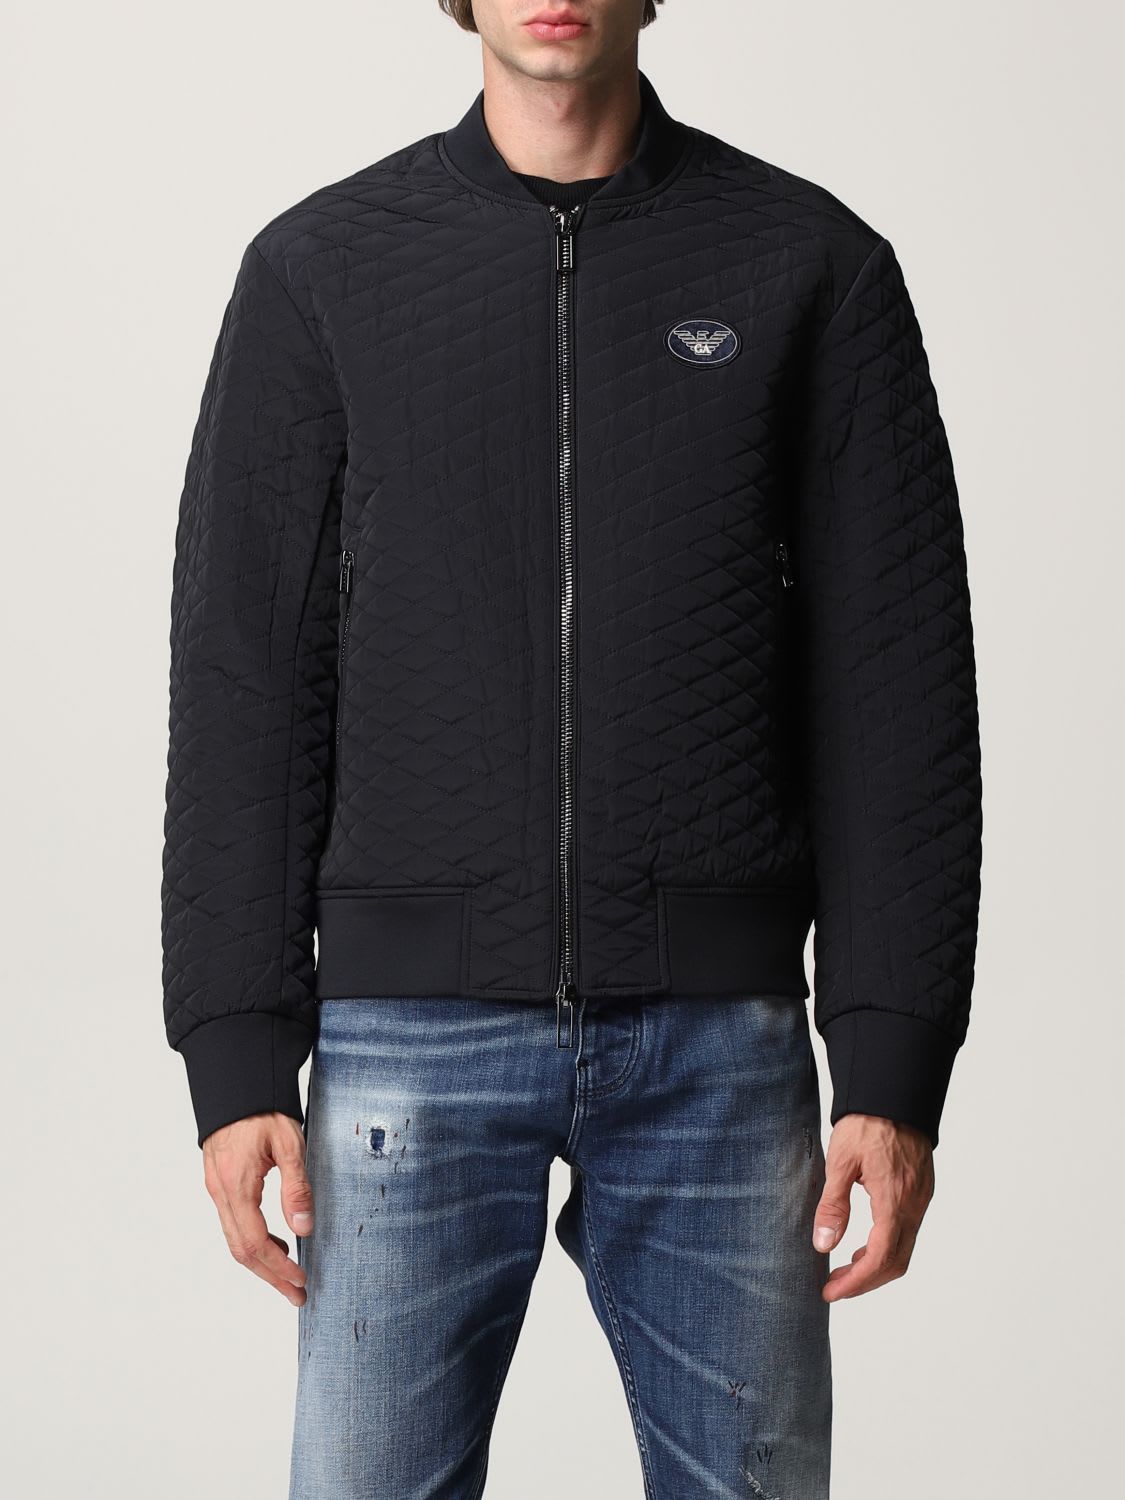 Emporio Armani Jacket Emporio Armani Bomber Jacket In Quilted Technical Fabric With Logo